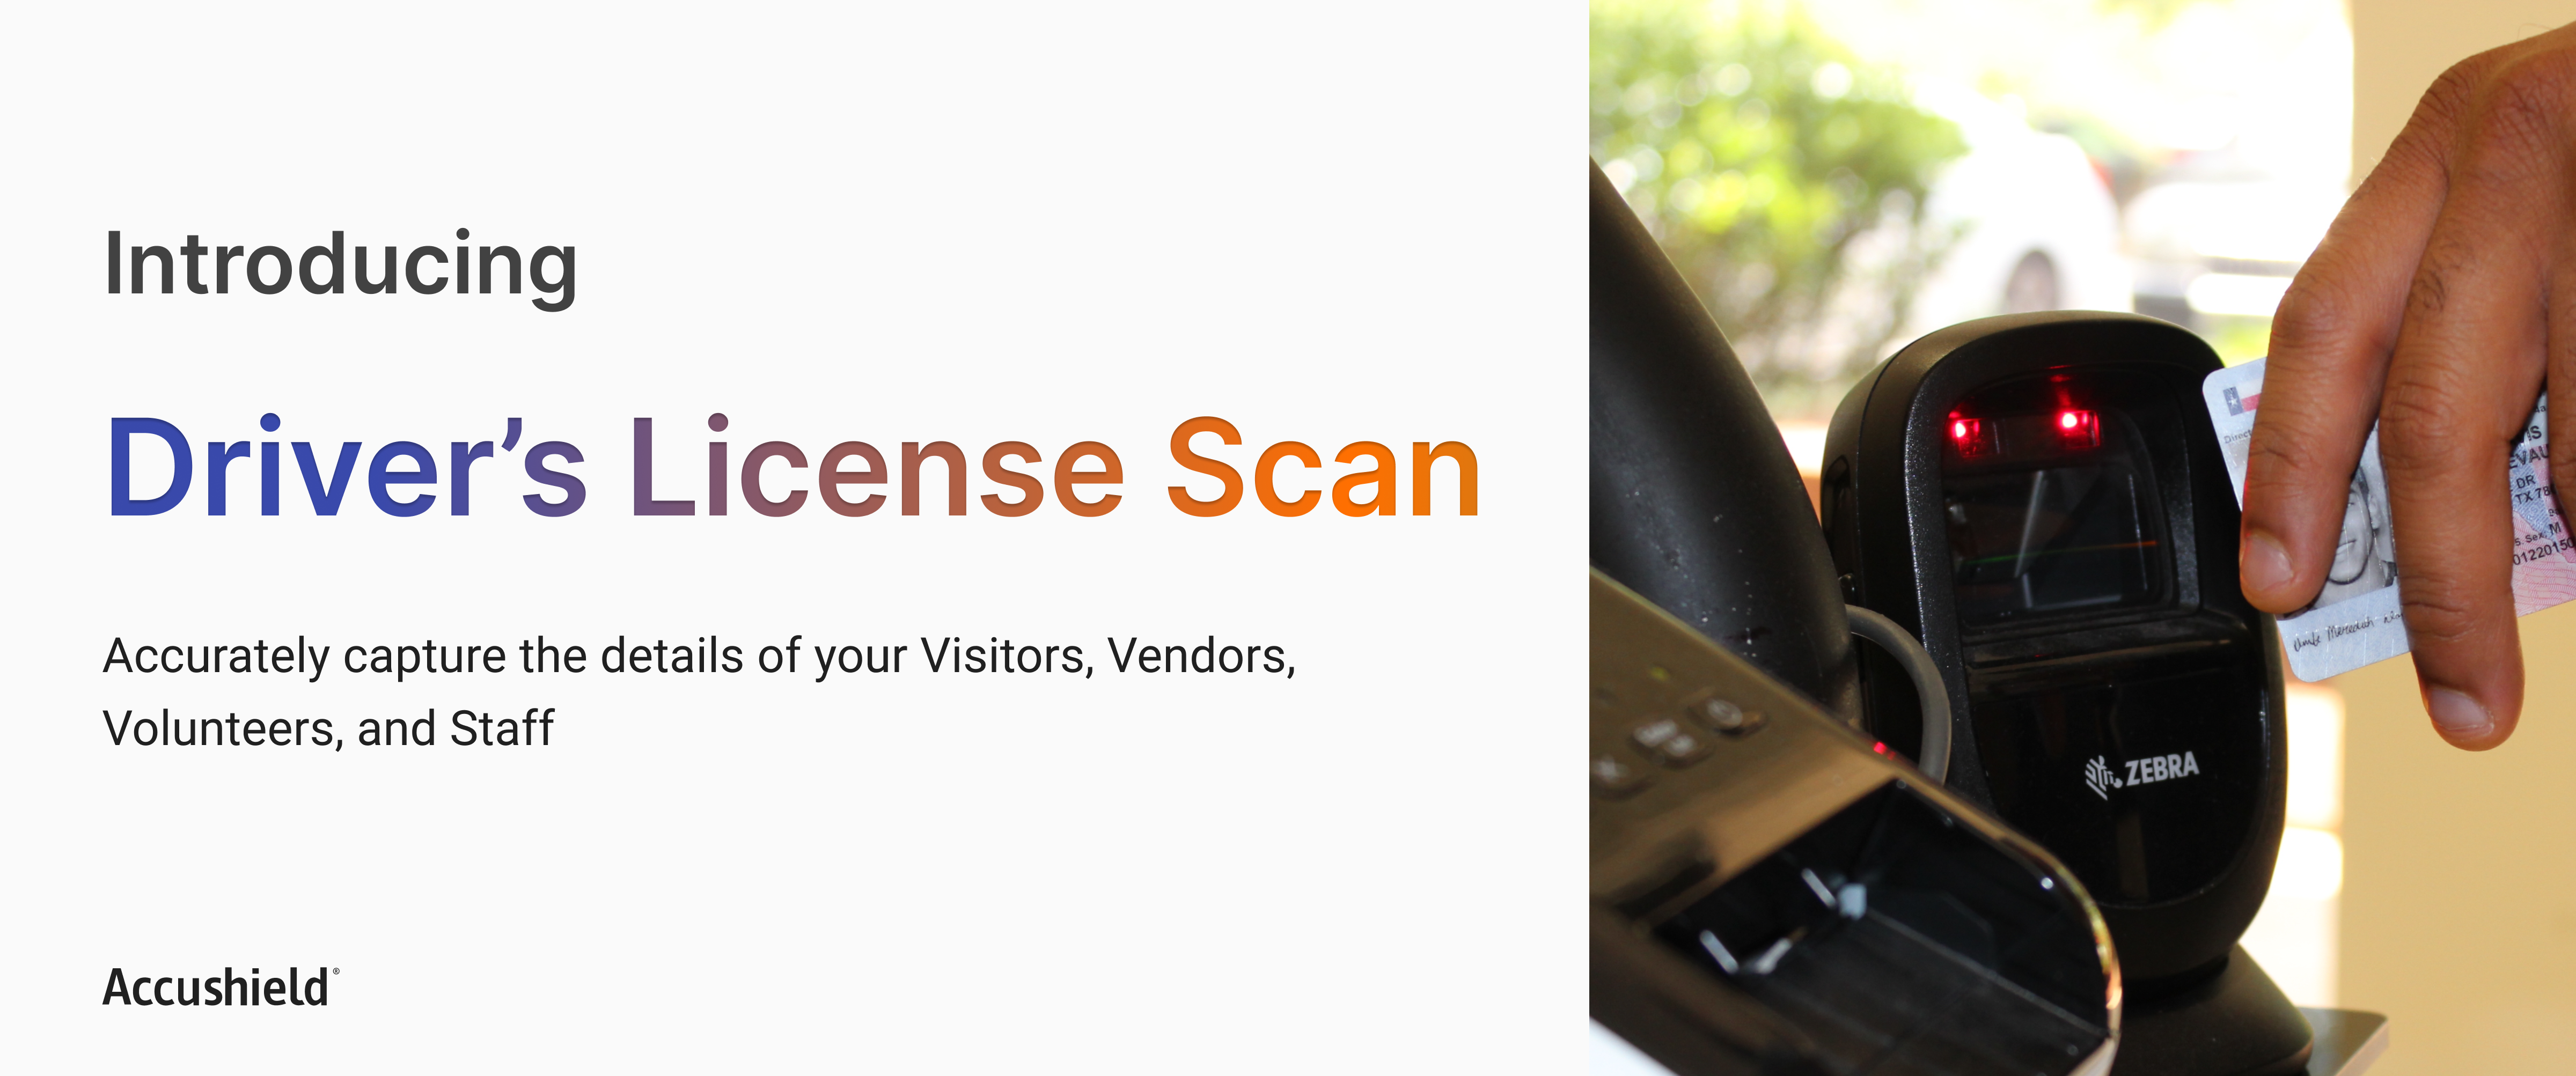 scanner scanning driver's license: introducing Driver's License Scan, accurately capture the details of your visitors, vendors, volunteers, and staff